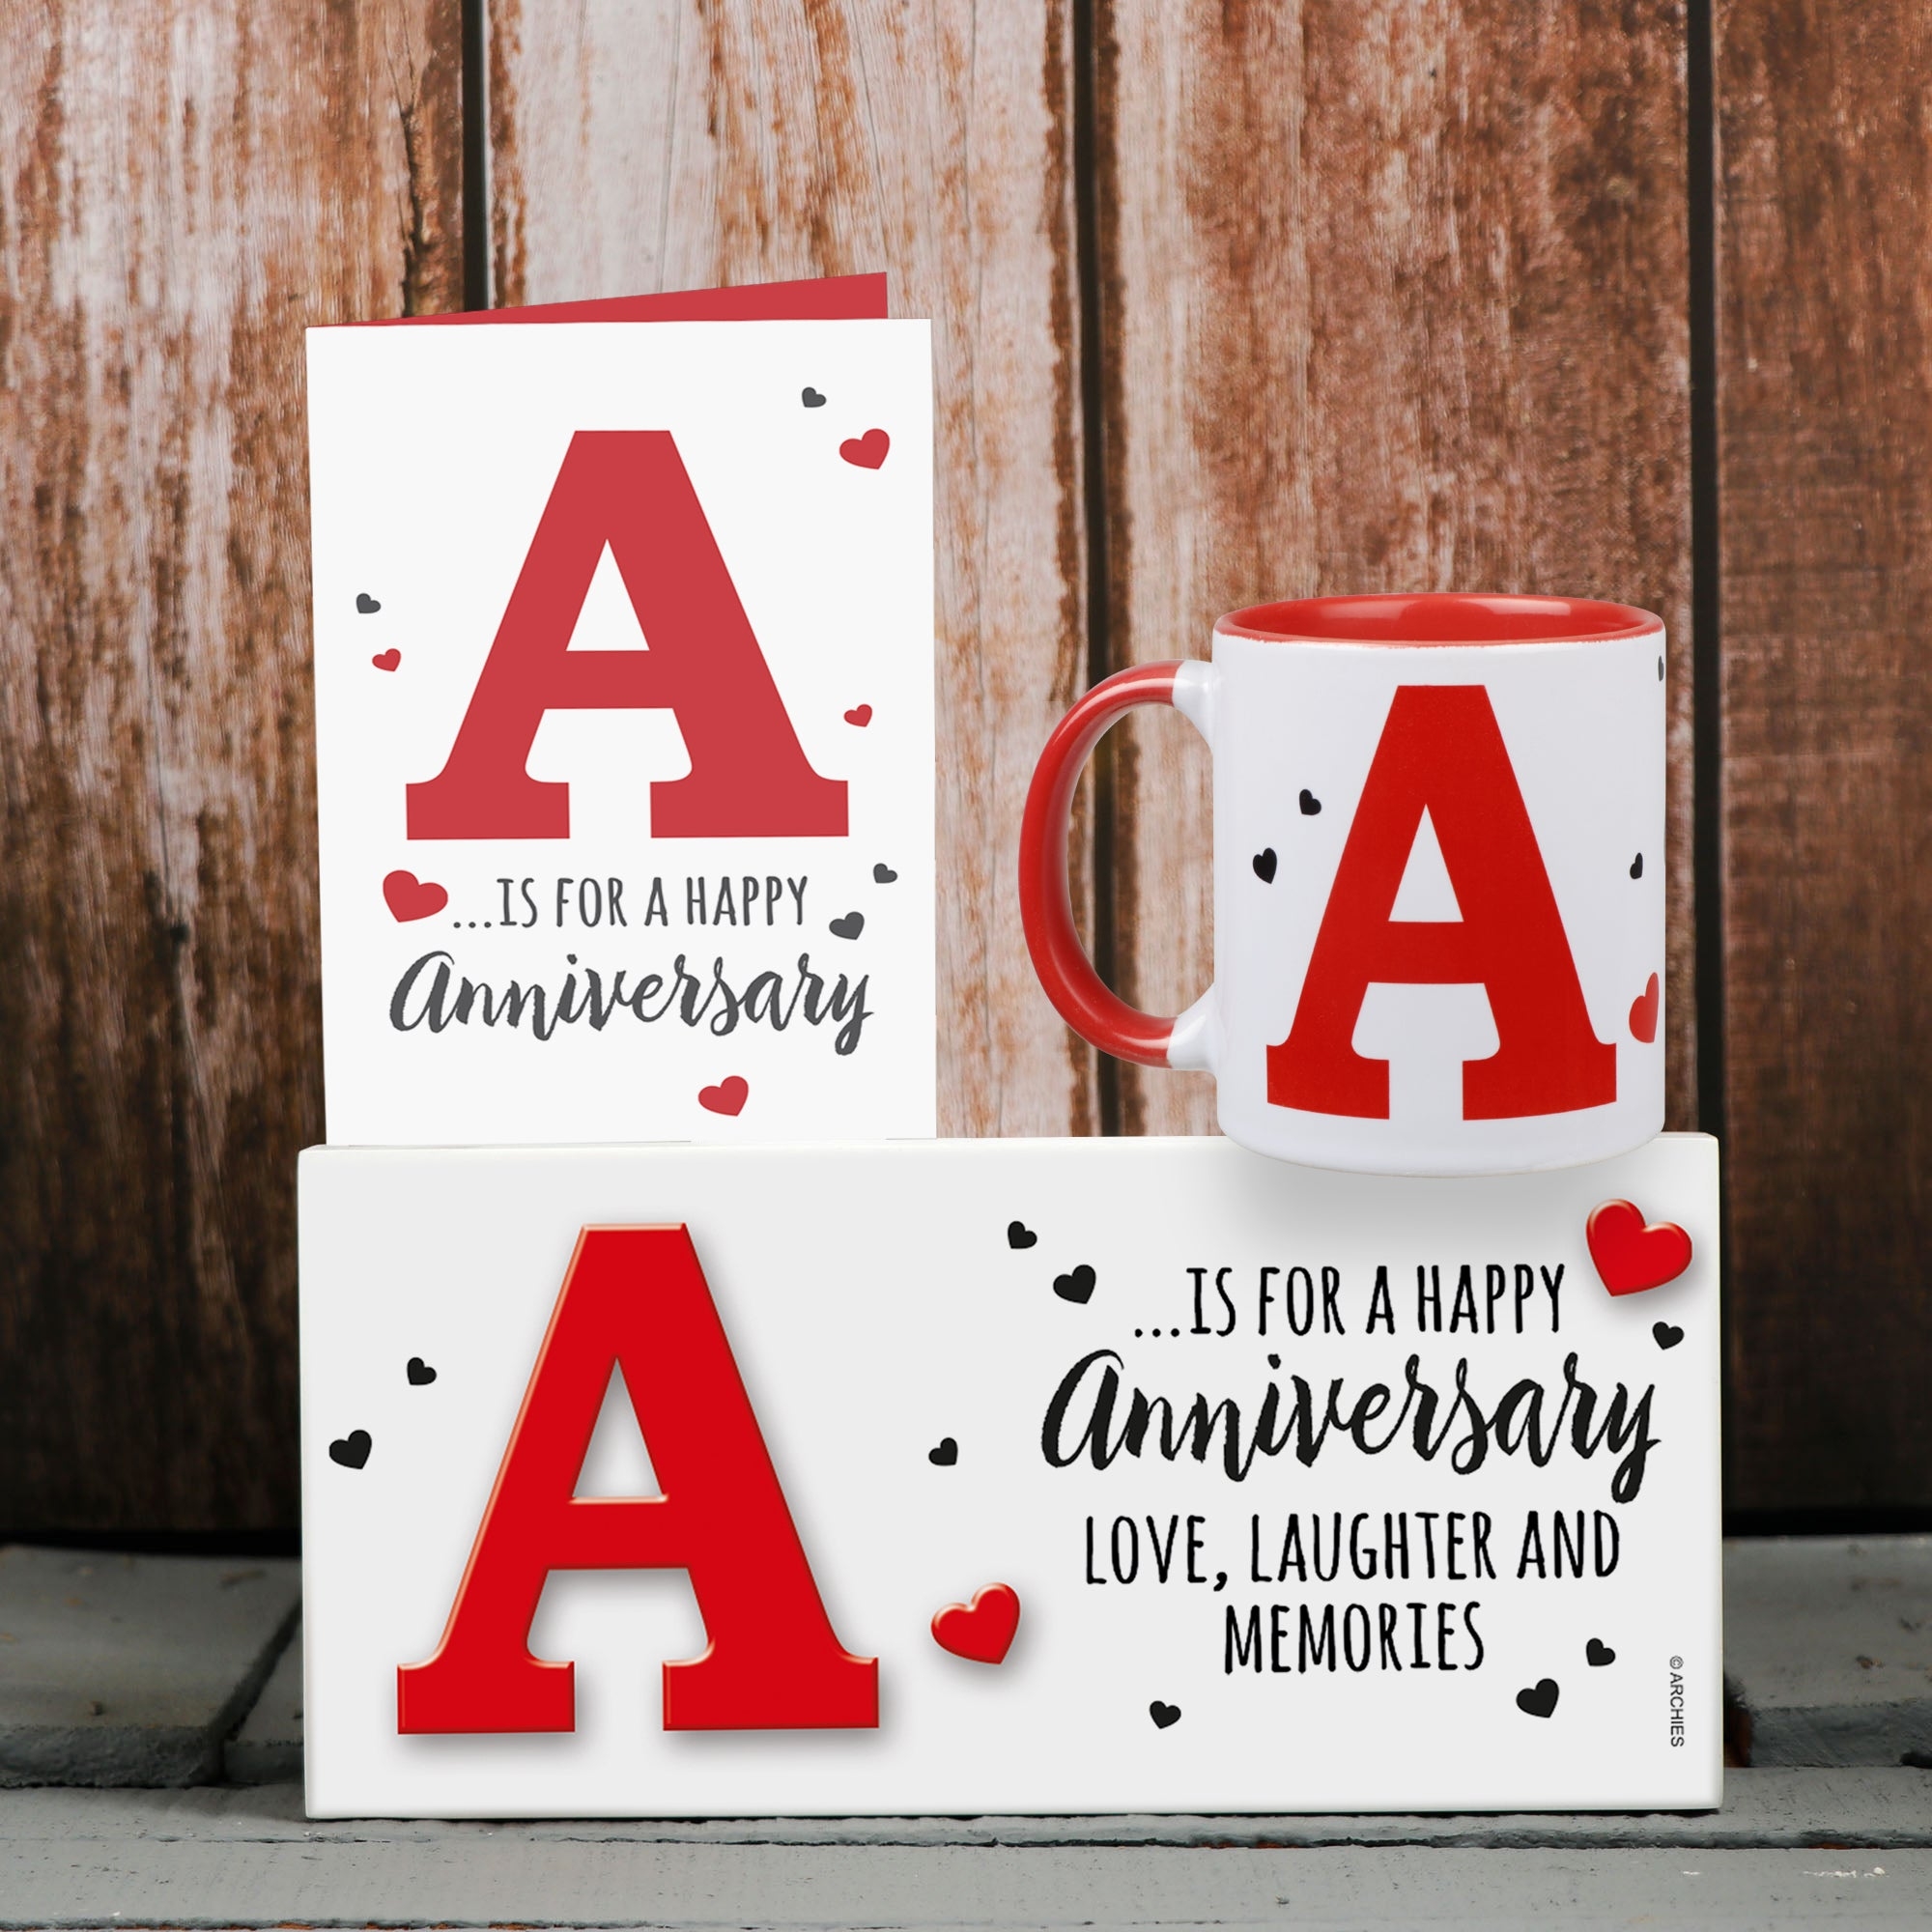 Archies | Archies KEEP SAKE Anniversary Gift Combo with Ceramic Mug and Elevated Initial Quotation - with a FREE GREETING CARD